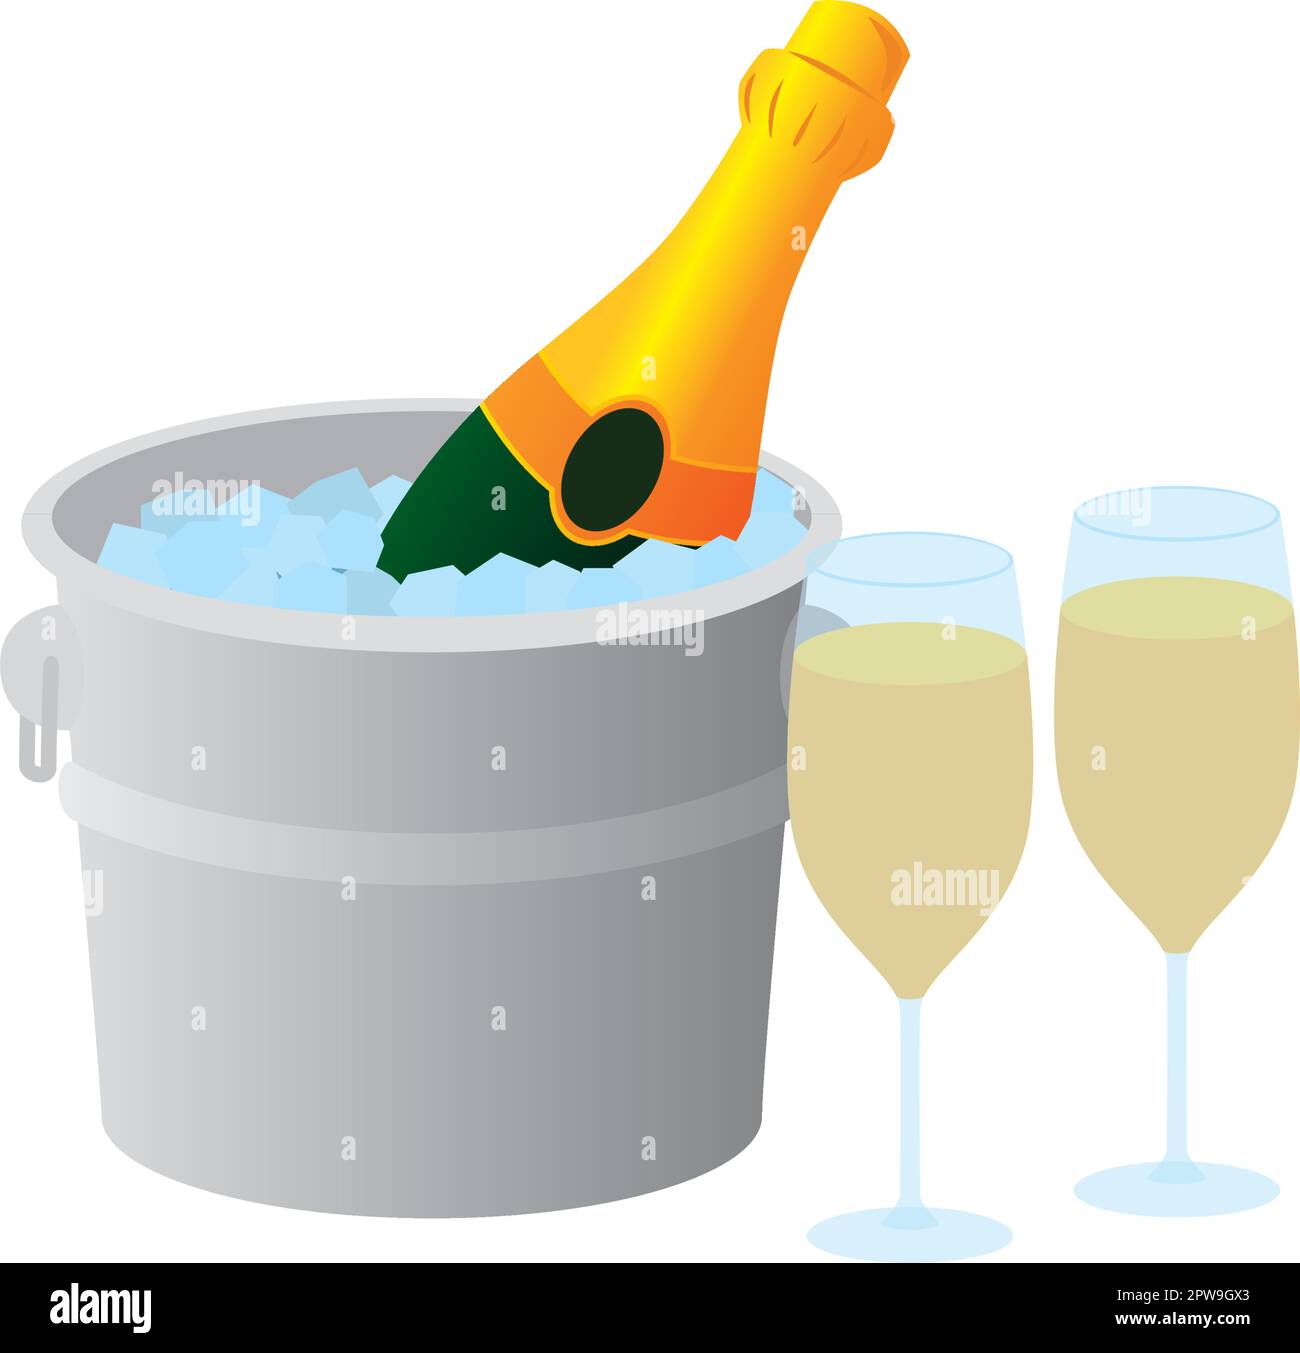 Bottle of Champagne in a Bucket with Ice Stock Vector